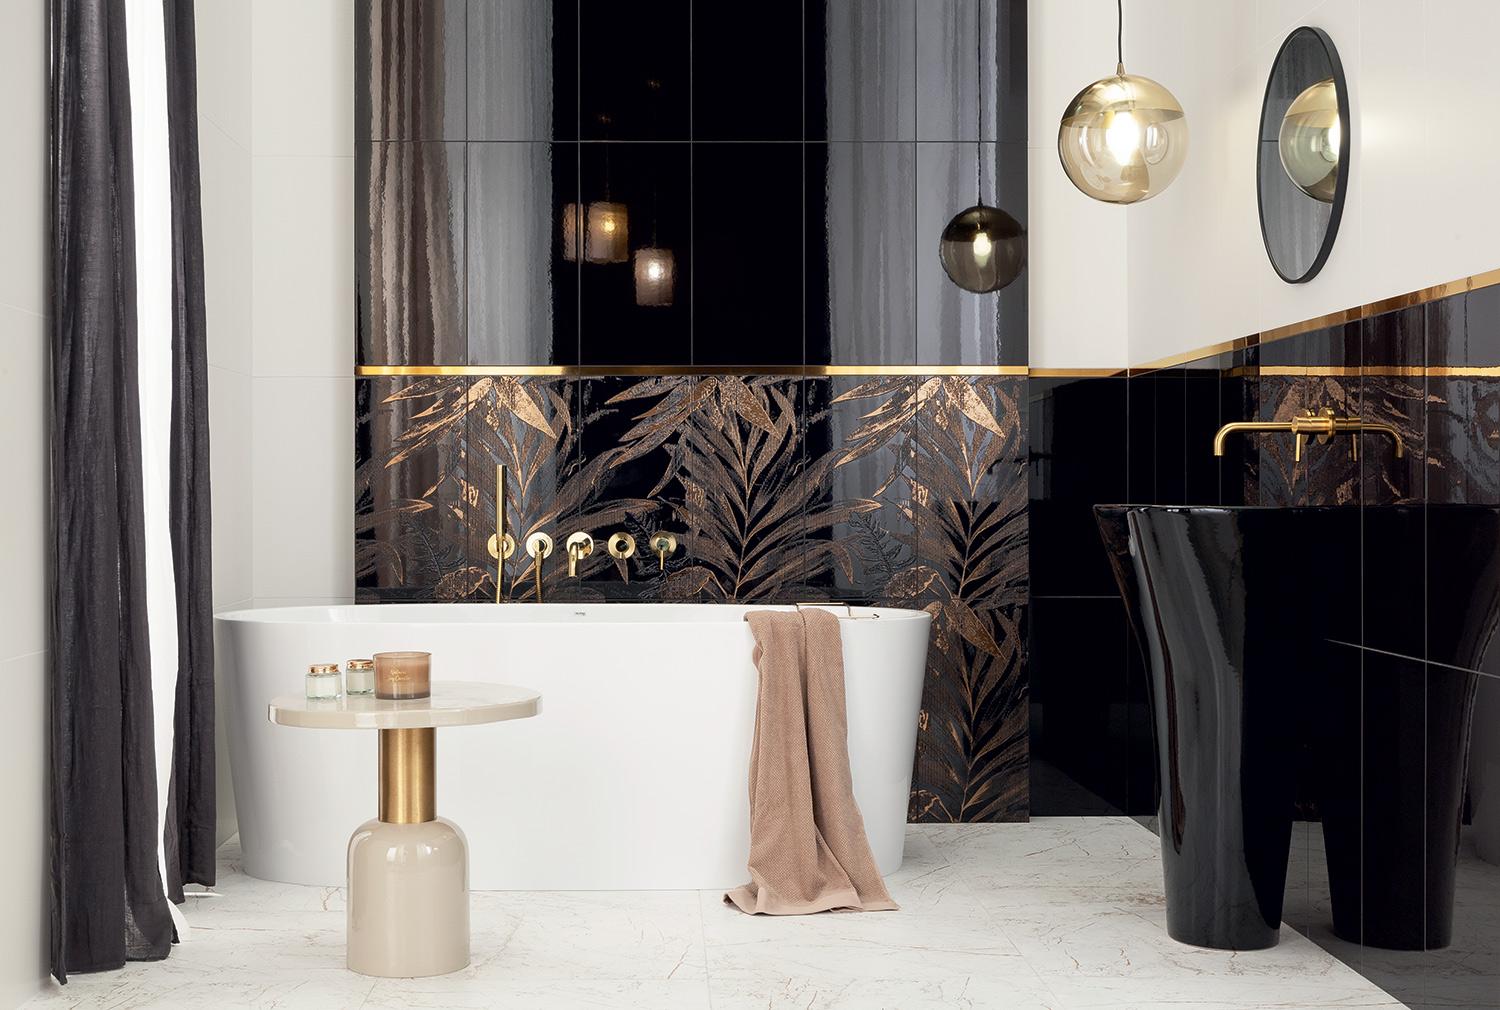 A sparkle of nonchalance and refinement to bring an interior to life